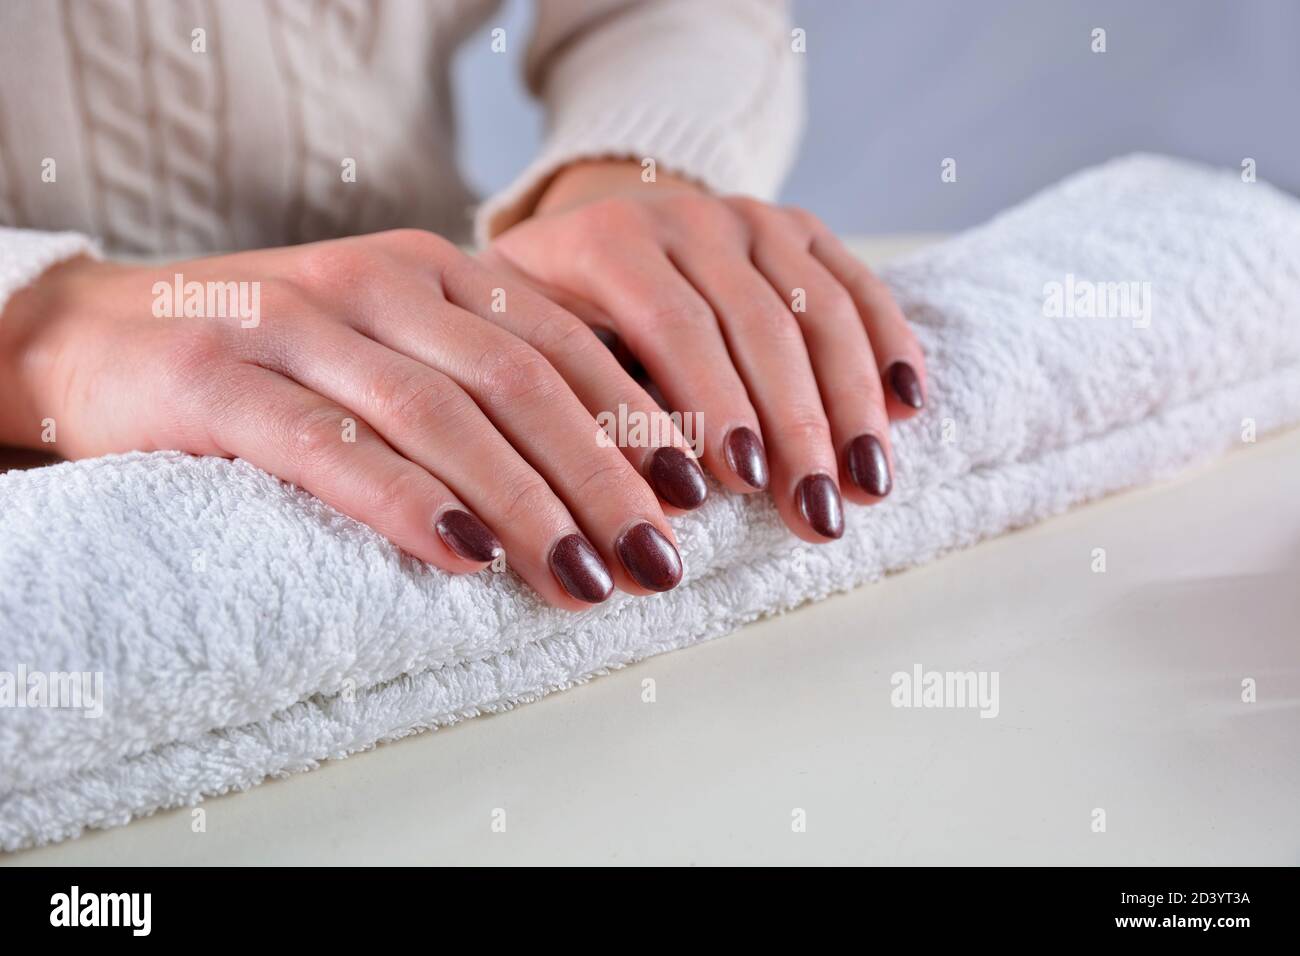 Hands with brown manicure Stock Photo by ©belchonock 124778972